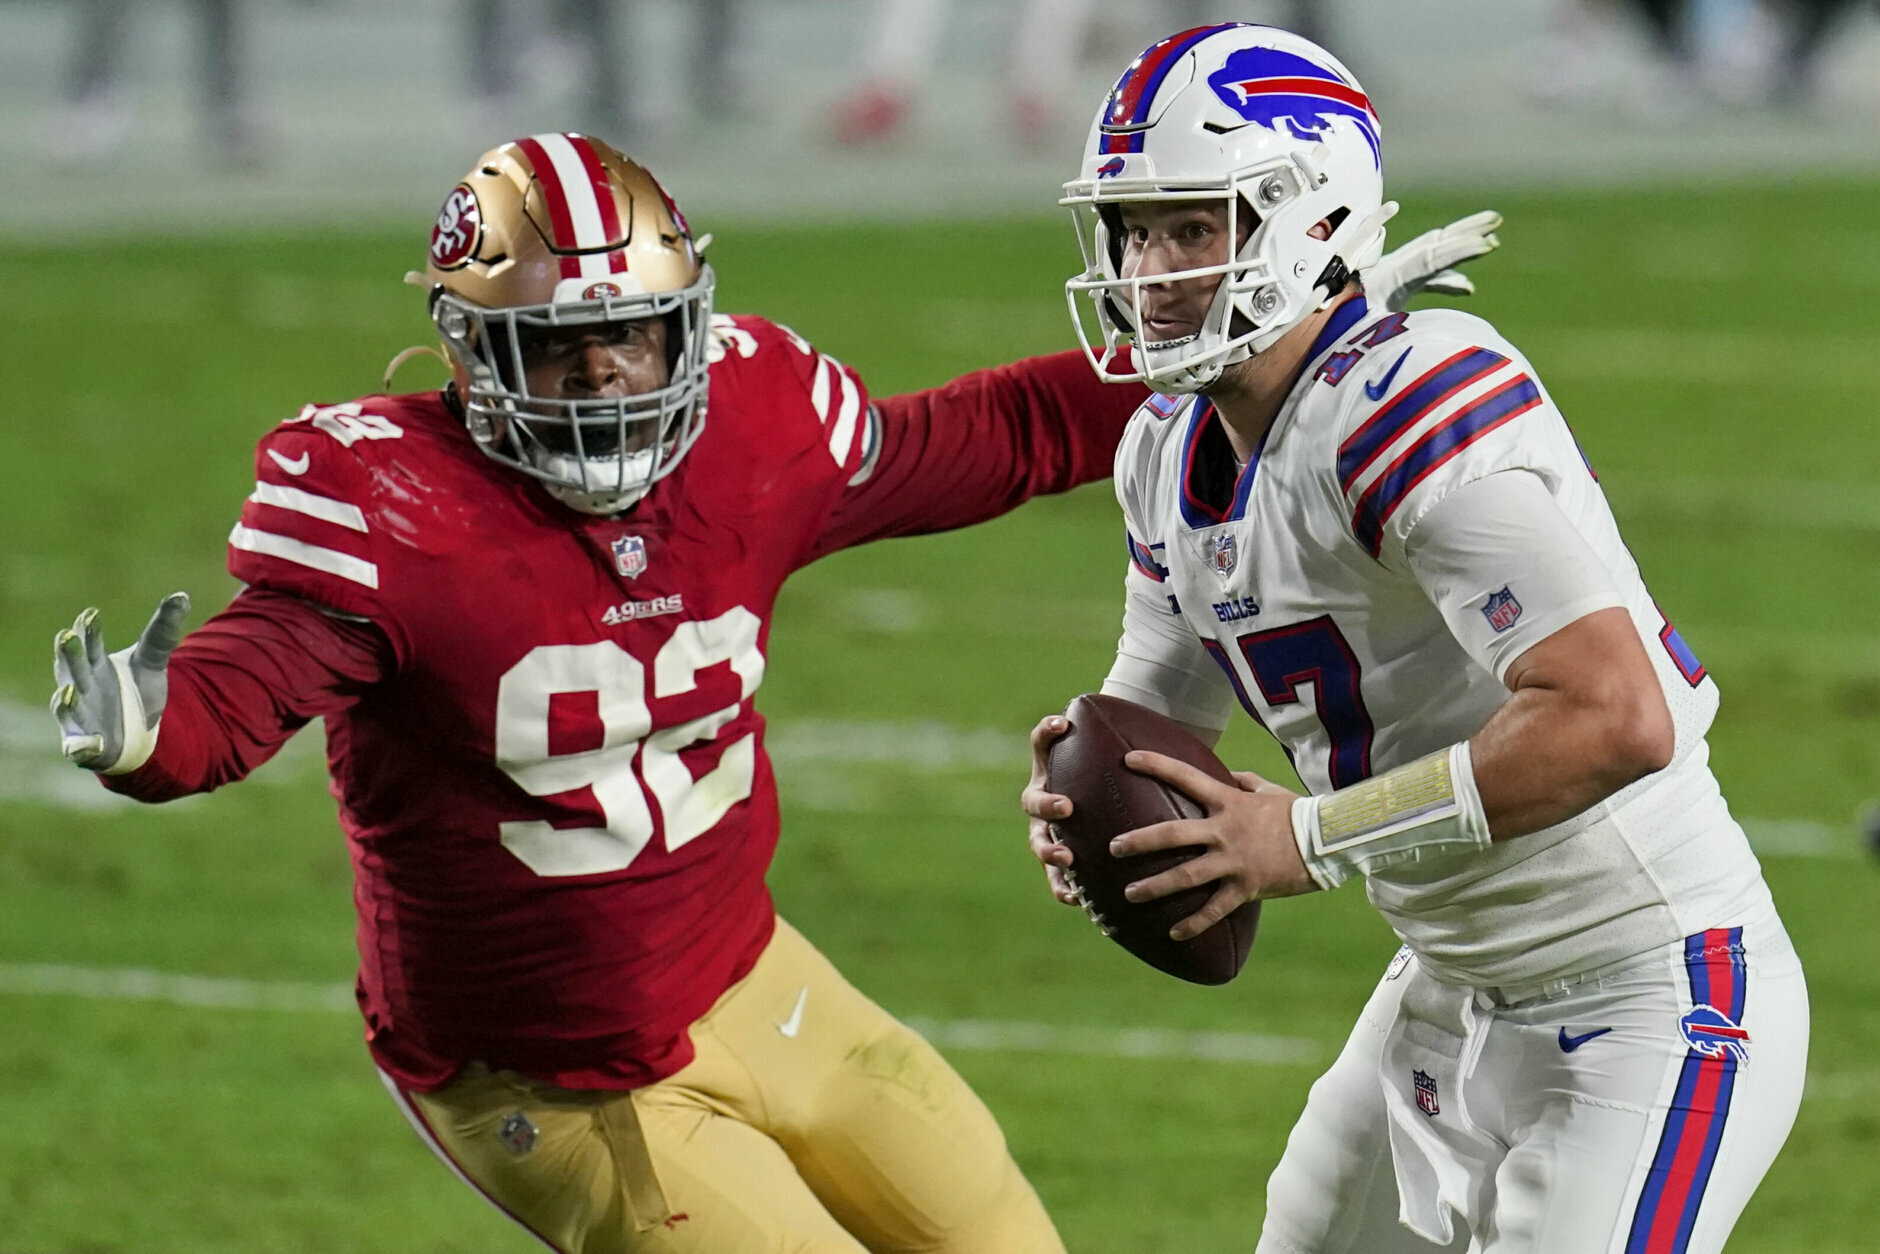 <p><b><i>Bills 34</i></b><br />
<b><i>49ers 24</i></b></p>
<p>It’s fitting this game quasi-shared a national stage with Washington because even as Josh Allen <a href="https://profootballtalk.nbcsports.com/2020/12/05/josh-allen-eight-wins-is-not-enough-were-not-in-the-nfc-east/">took shots at the NFC East</a> his Bills took a step closer to winning the AFC East by snapping their Washington-esque 21-year drought on Monday night. I&#8217;m not sure it erases the sting from the <a href="https://www.youtube.com/watch?v=l3MDZBGrX4Y">Hail Murray</a> they gave up in the same stadium two weeks prior but it certainly has them feeling good about the prospects of another signature primetime win over Pittsburgh next week.</p>
